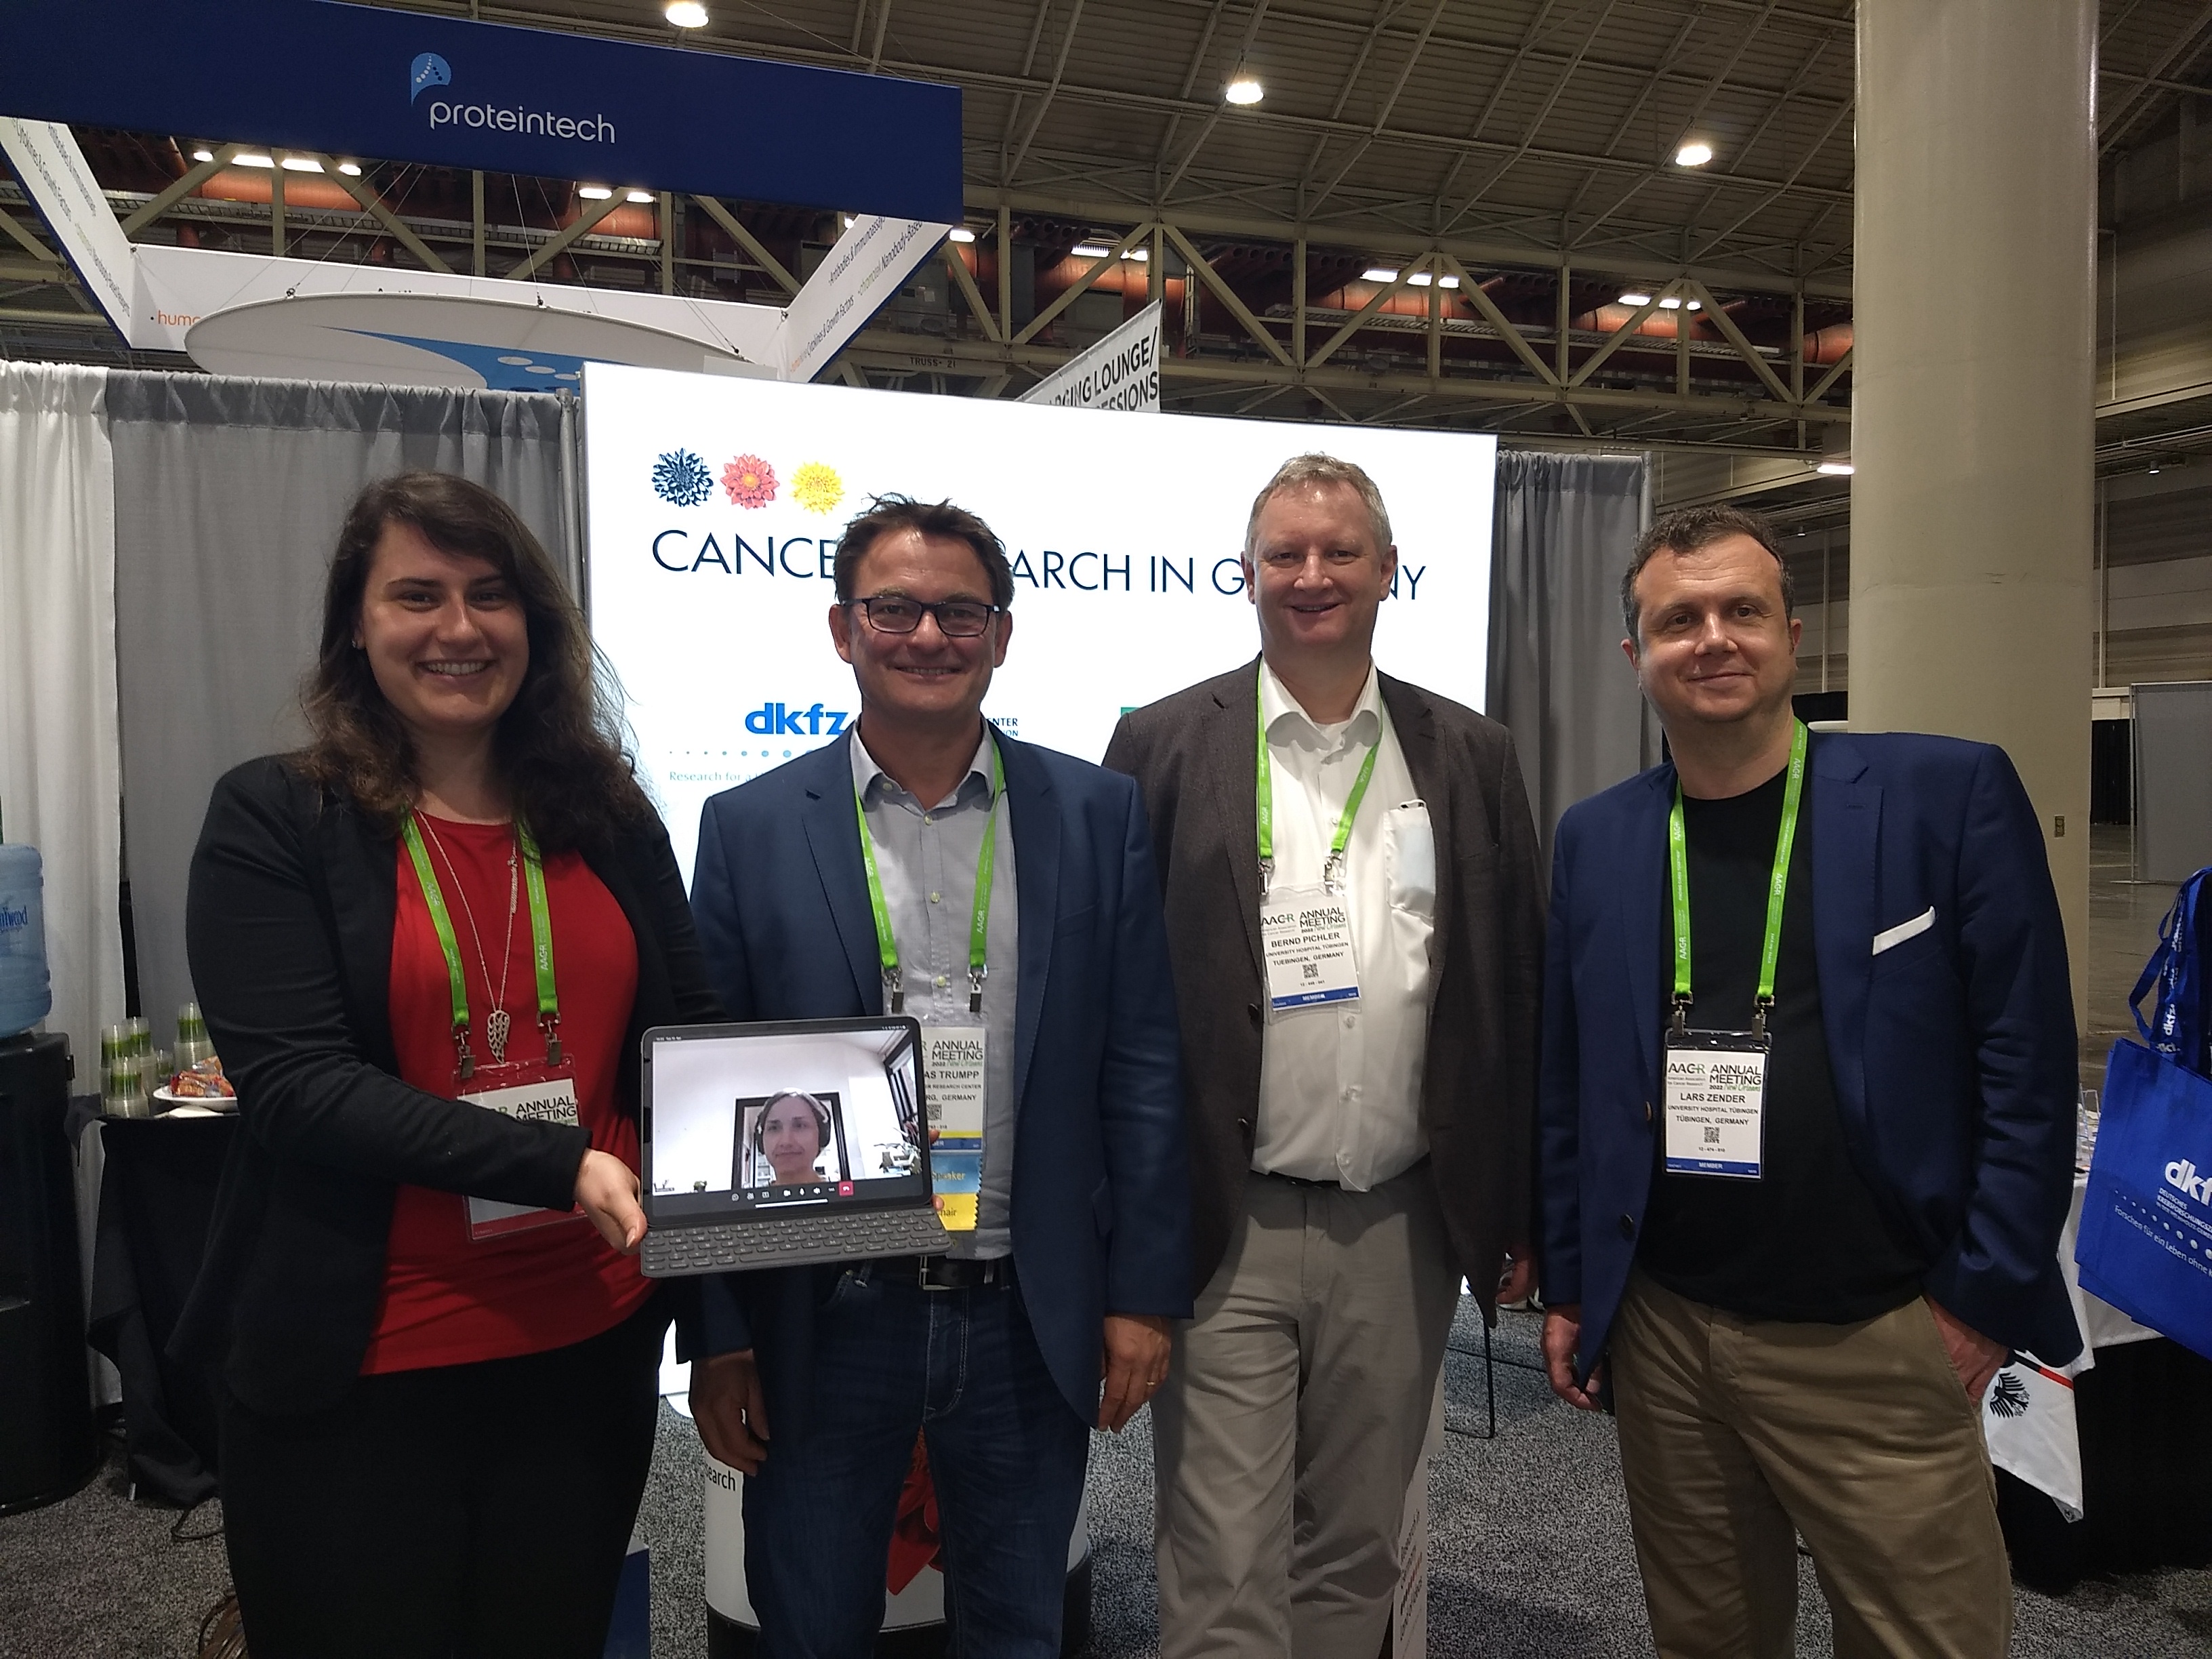 Meet the Scientist at the Booth – both face-to-face and virtually (from left to right): Marissa Dubbelaar, Nataša Stojanović , Andreas Trumpp, Bernd Pichler and Lars Zender